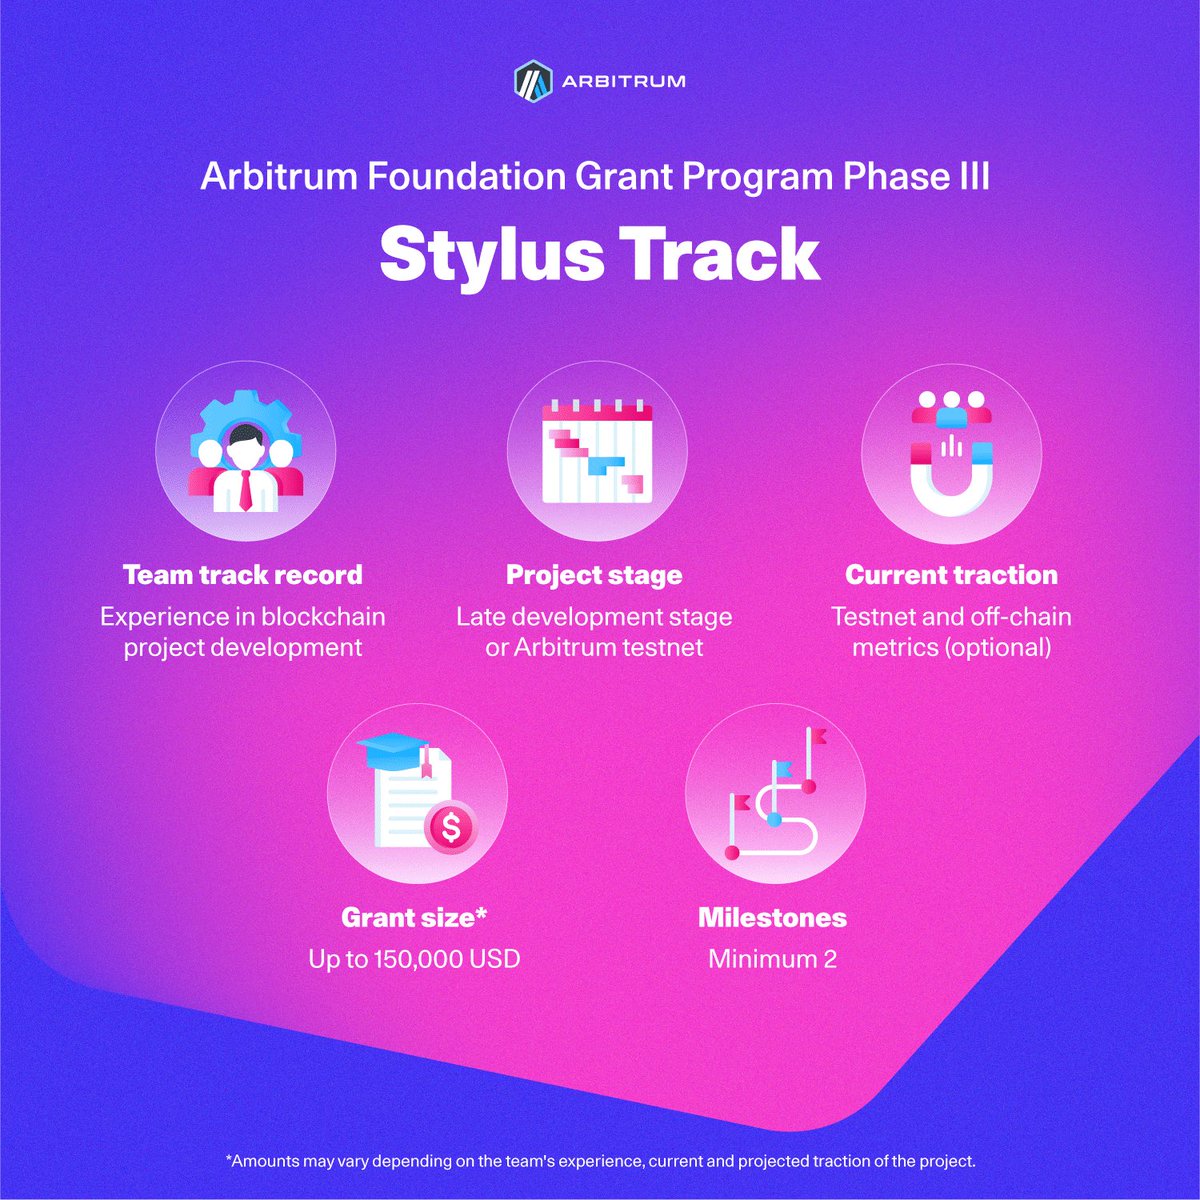 4. The Stylus Track✒️

For innovative projects such as (but not limited to) math-heavy finance algorithms, onchain generative art or complex cryptography on Stylus.